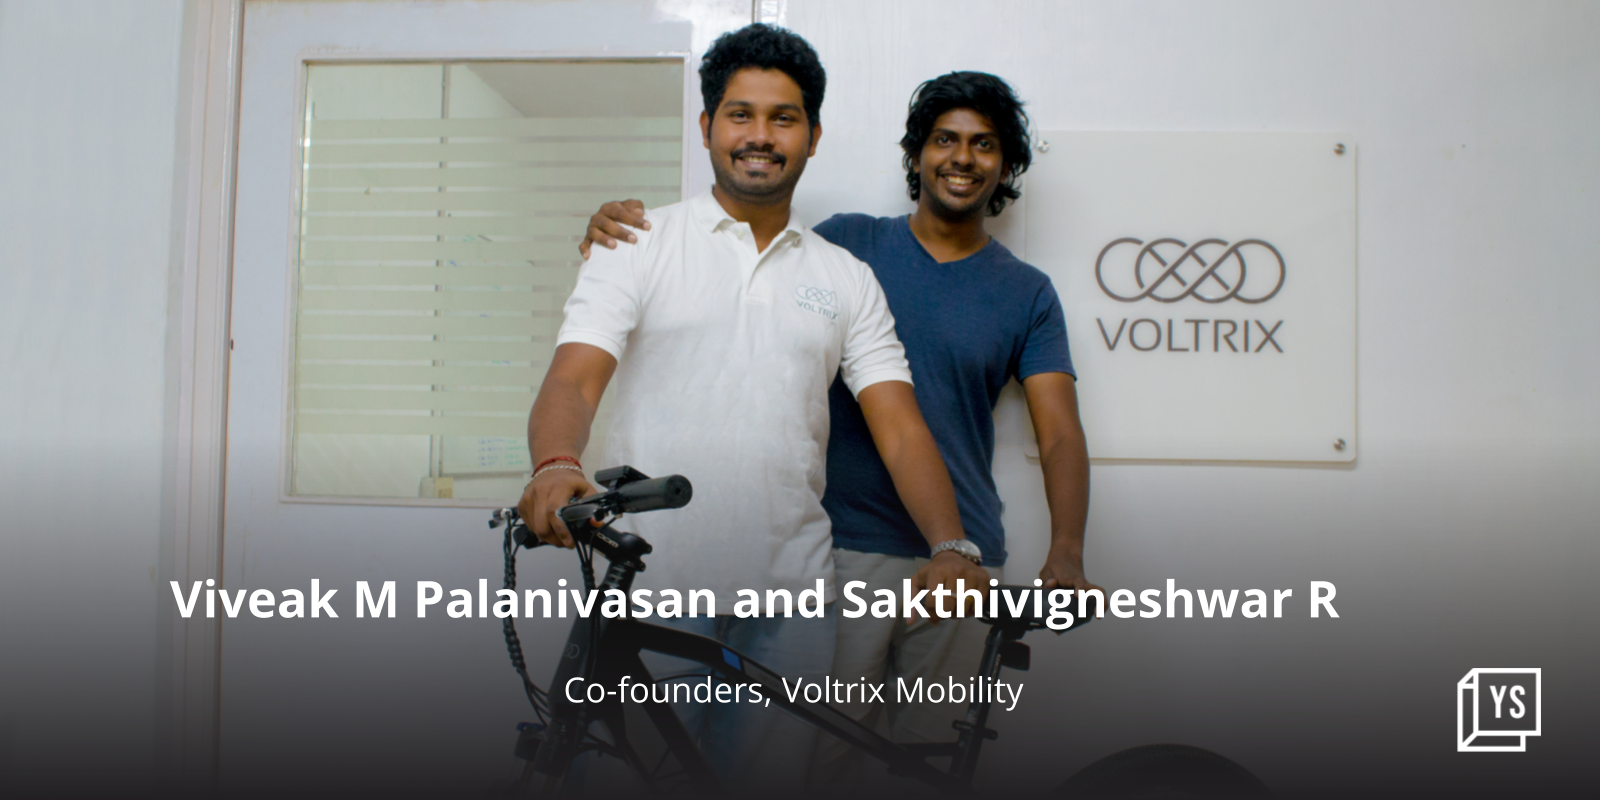 Pedalling for health, Chennai startup Voltrix Mobility's electric bicycles focus on tech